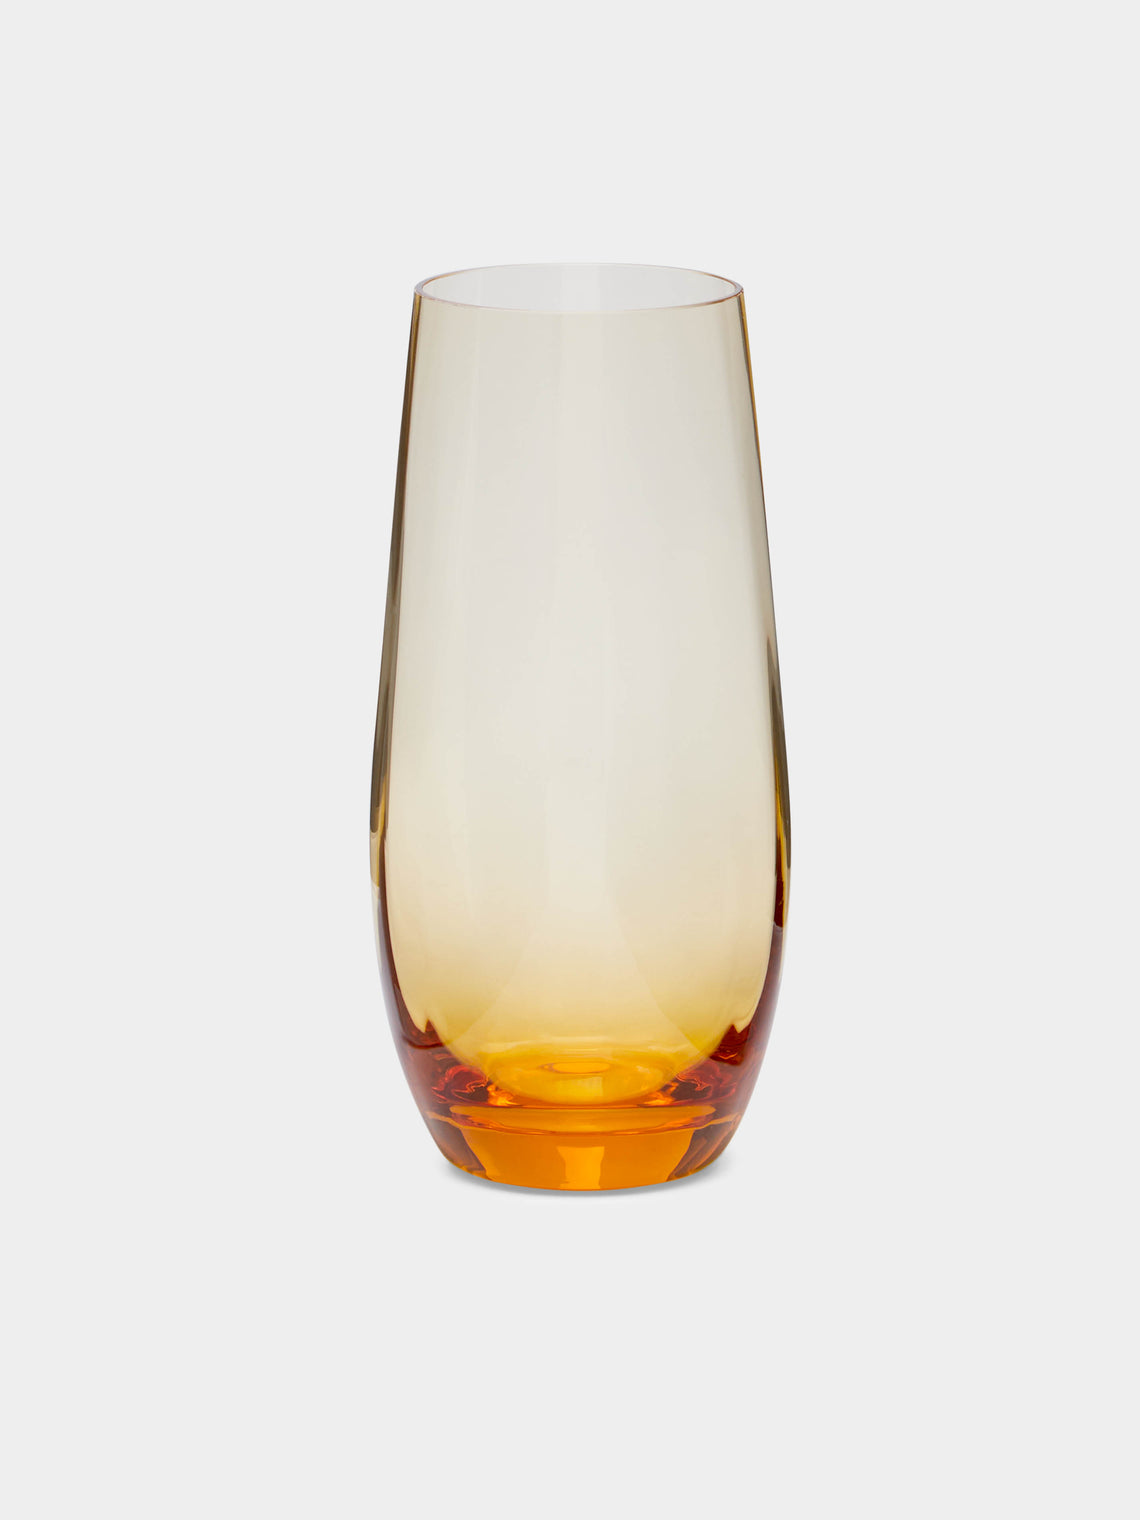 Moser - Optic Hand-Blown Crystal Water Glasses (Set of 2) -  - ABASK - 